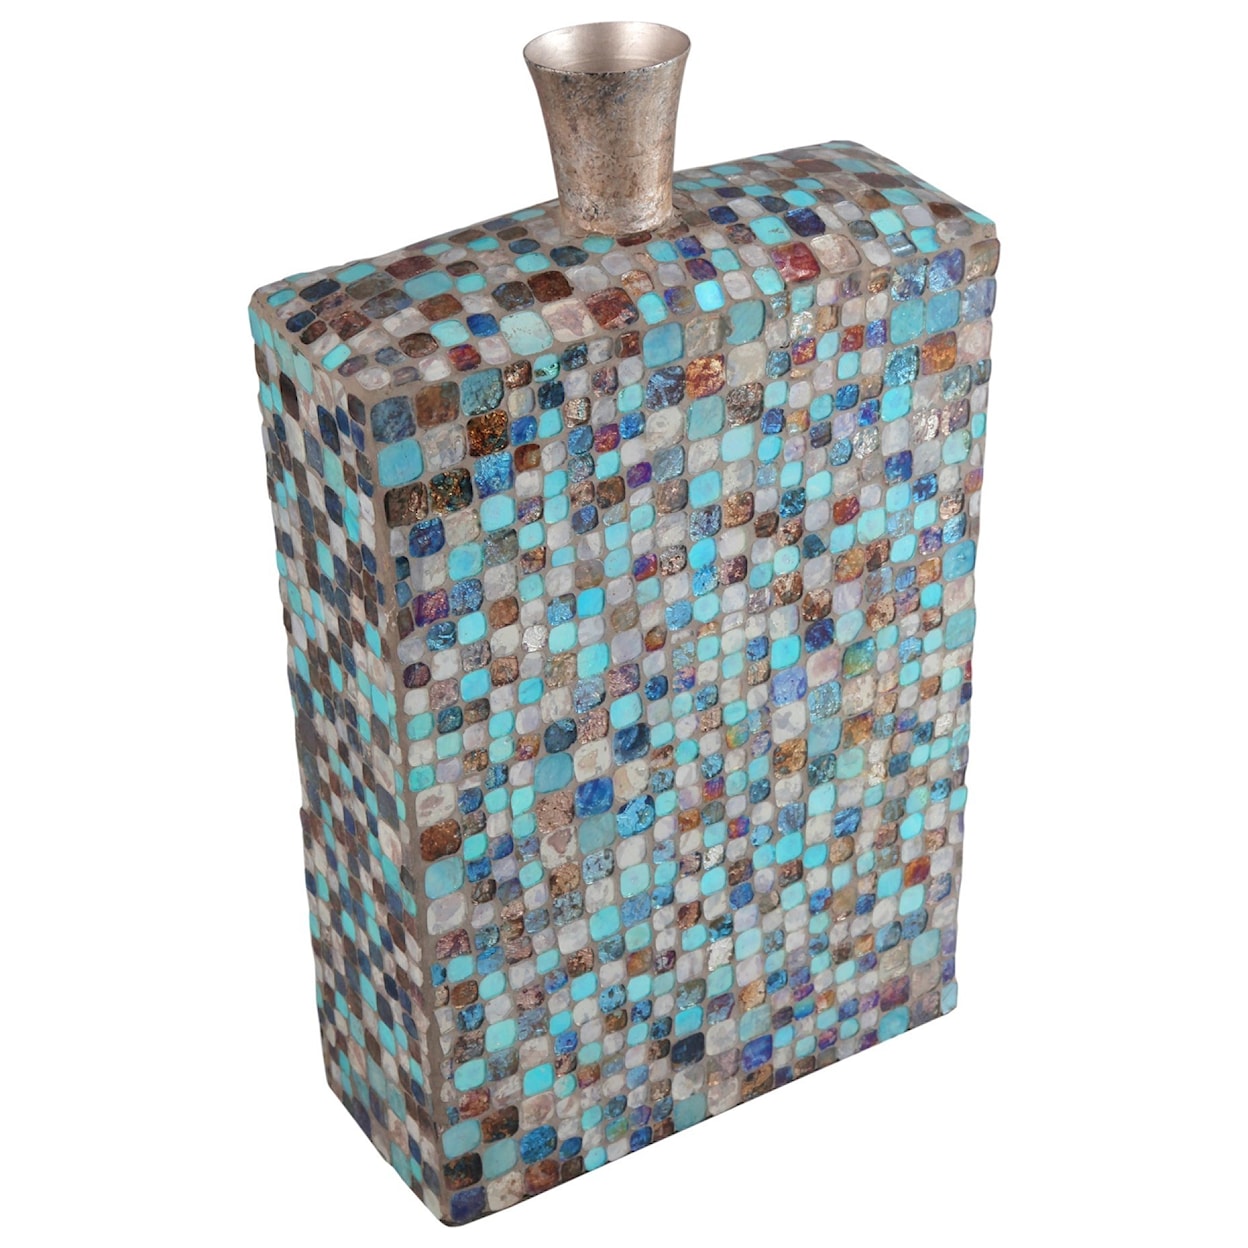 Moe's Home Collection Vases & Urns Azul Mosaic Vase Tall